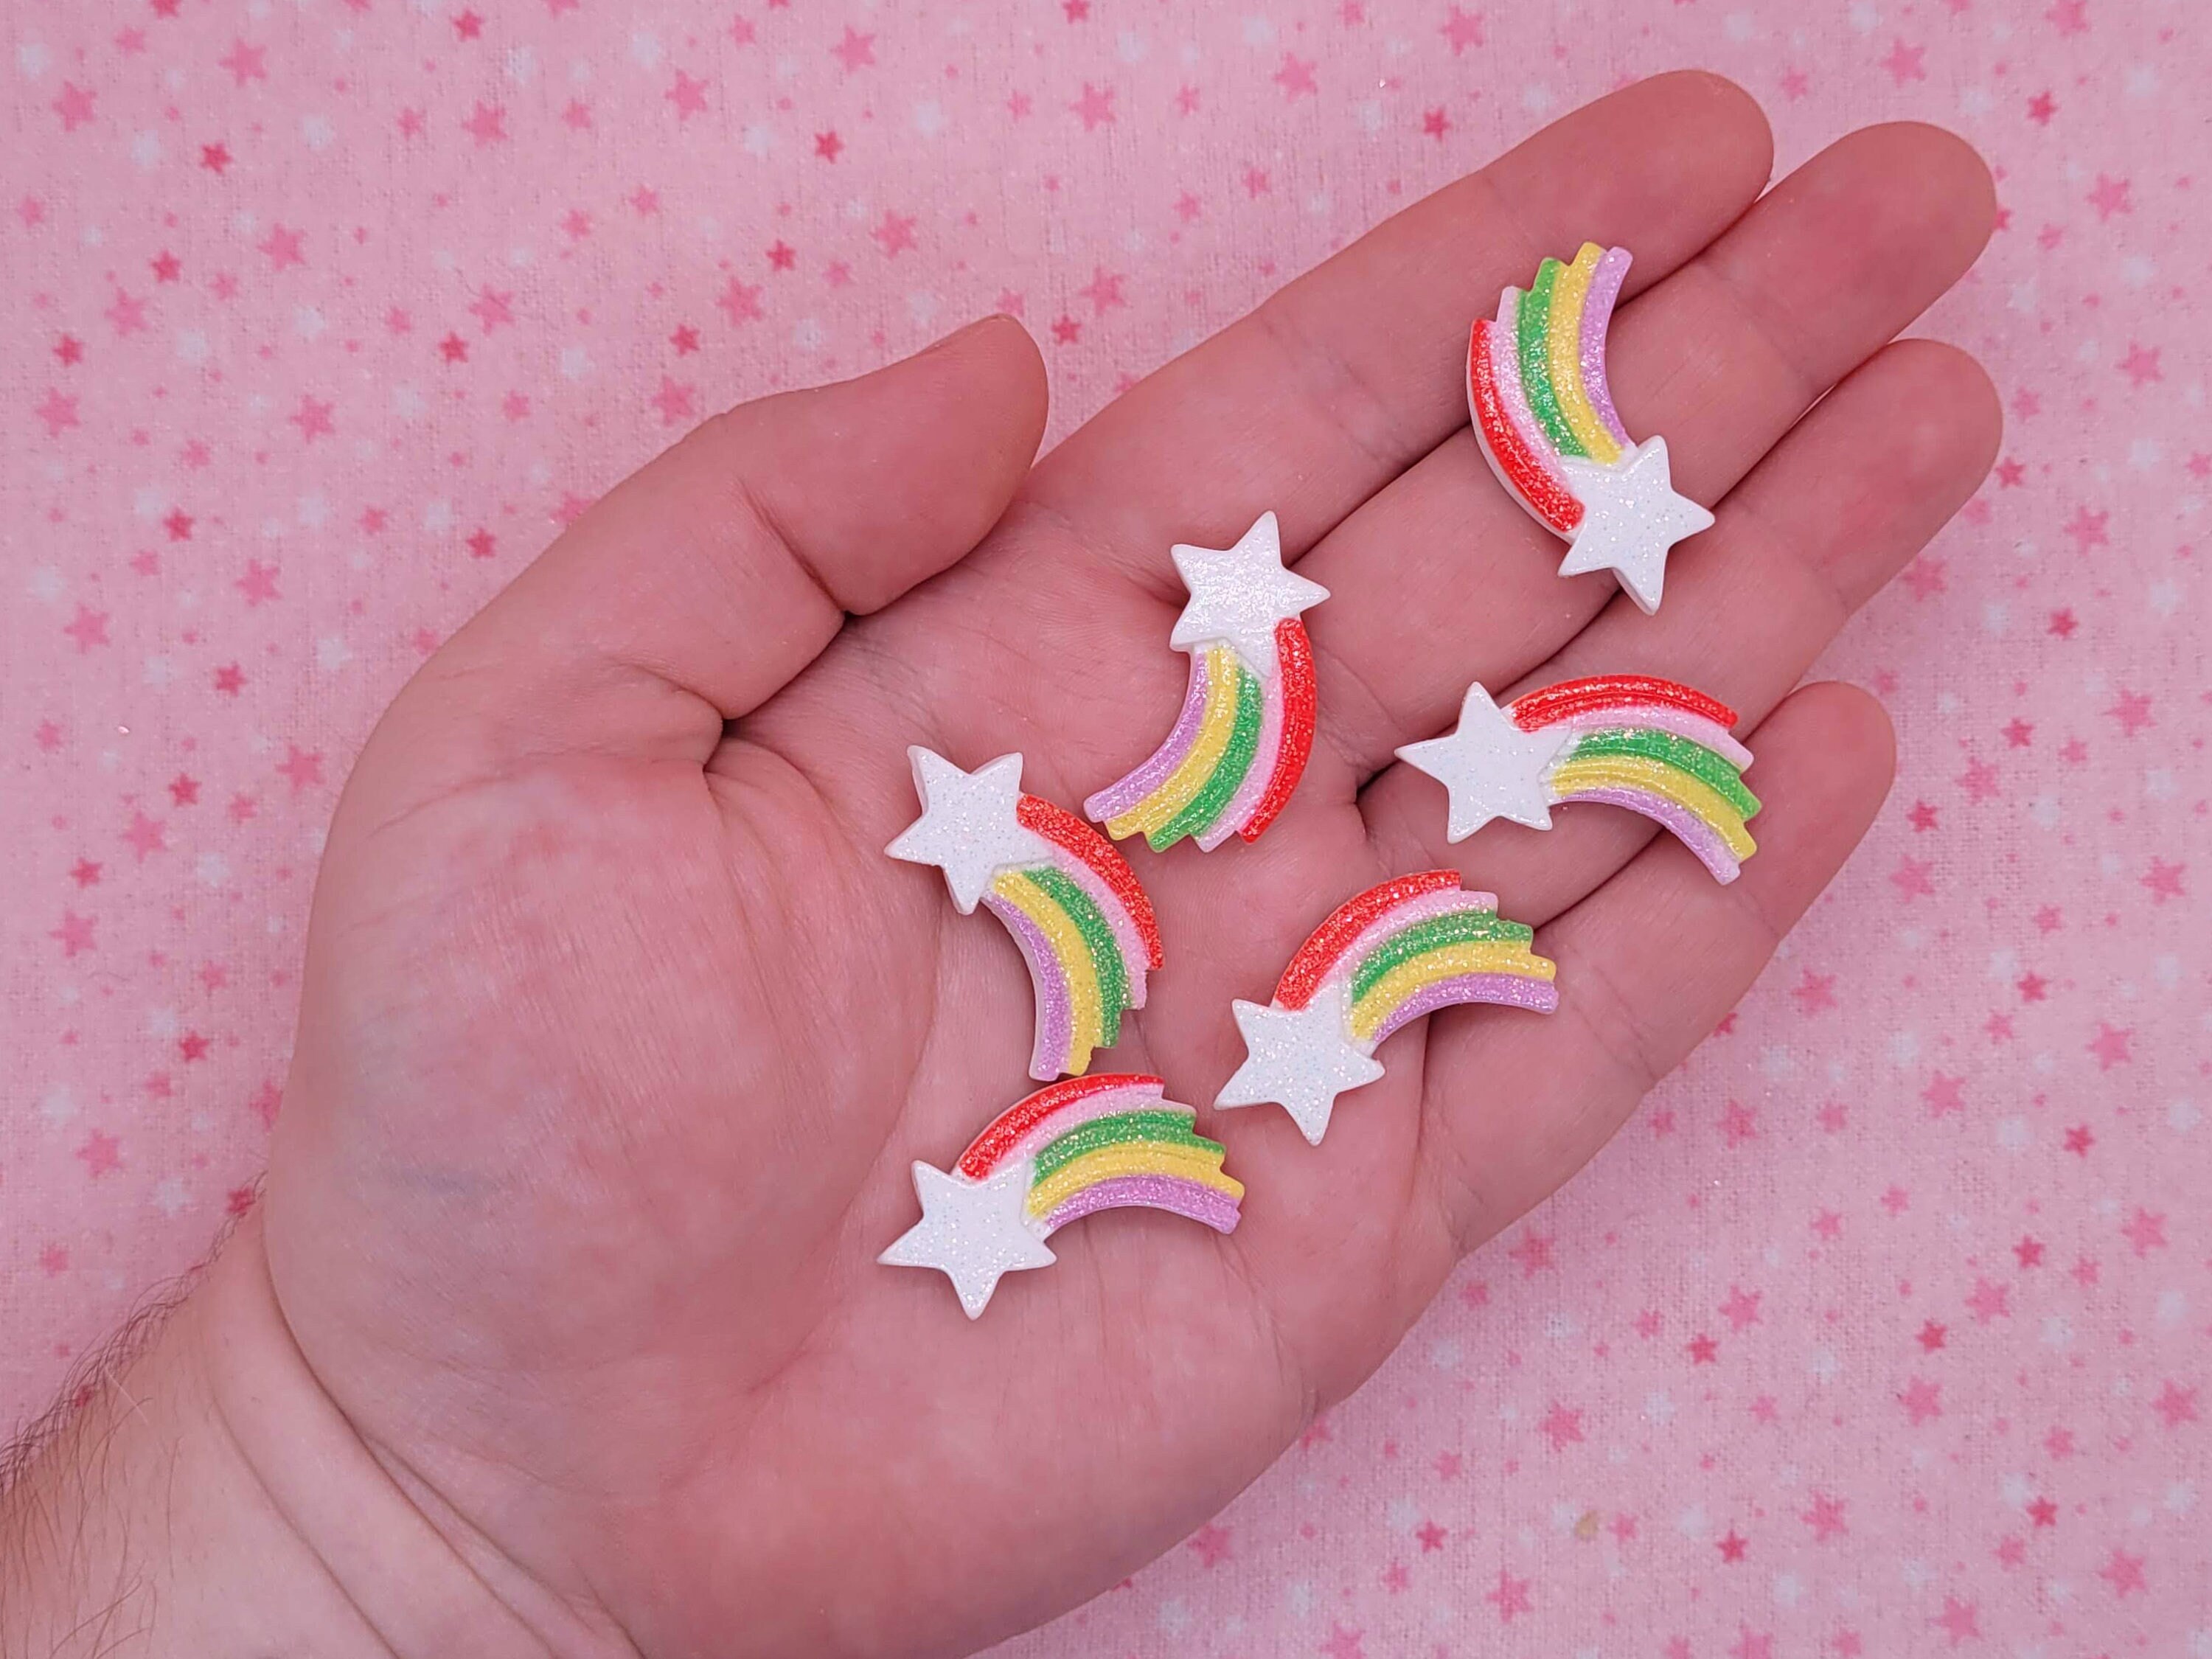 Shooting Star Star Shaped Glitter Iridescent Star Shaped Glitter Tumblers,  Resin, Nail Art, Crafts, Cosmetics & More Multi-colored 